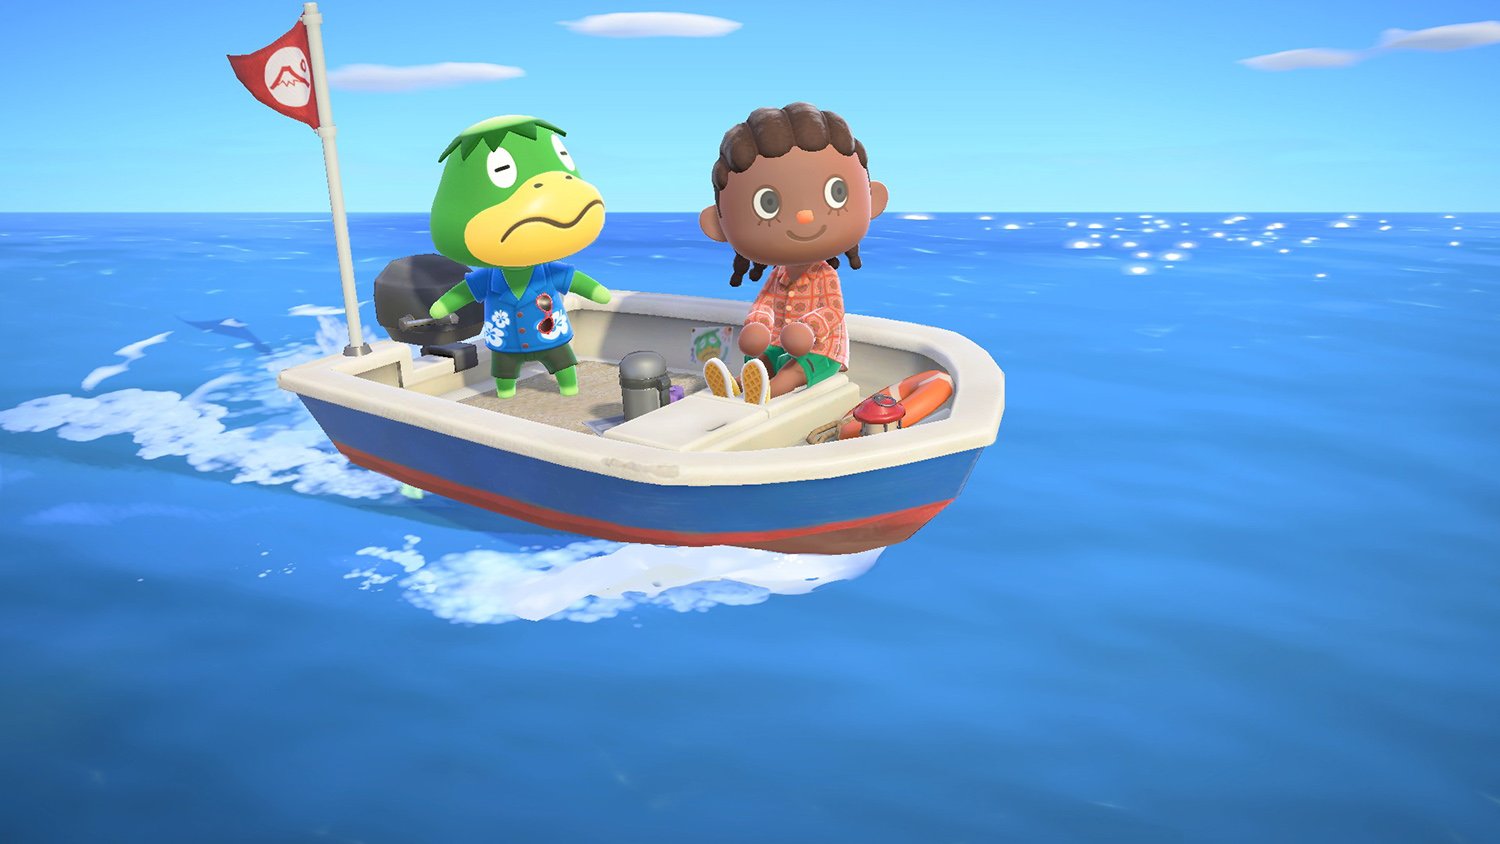 Kappn, a character based on Japanese folklore, and a villager ride a boat in Animal Crossing: New Horizons